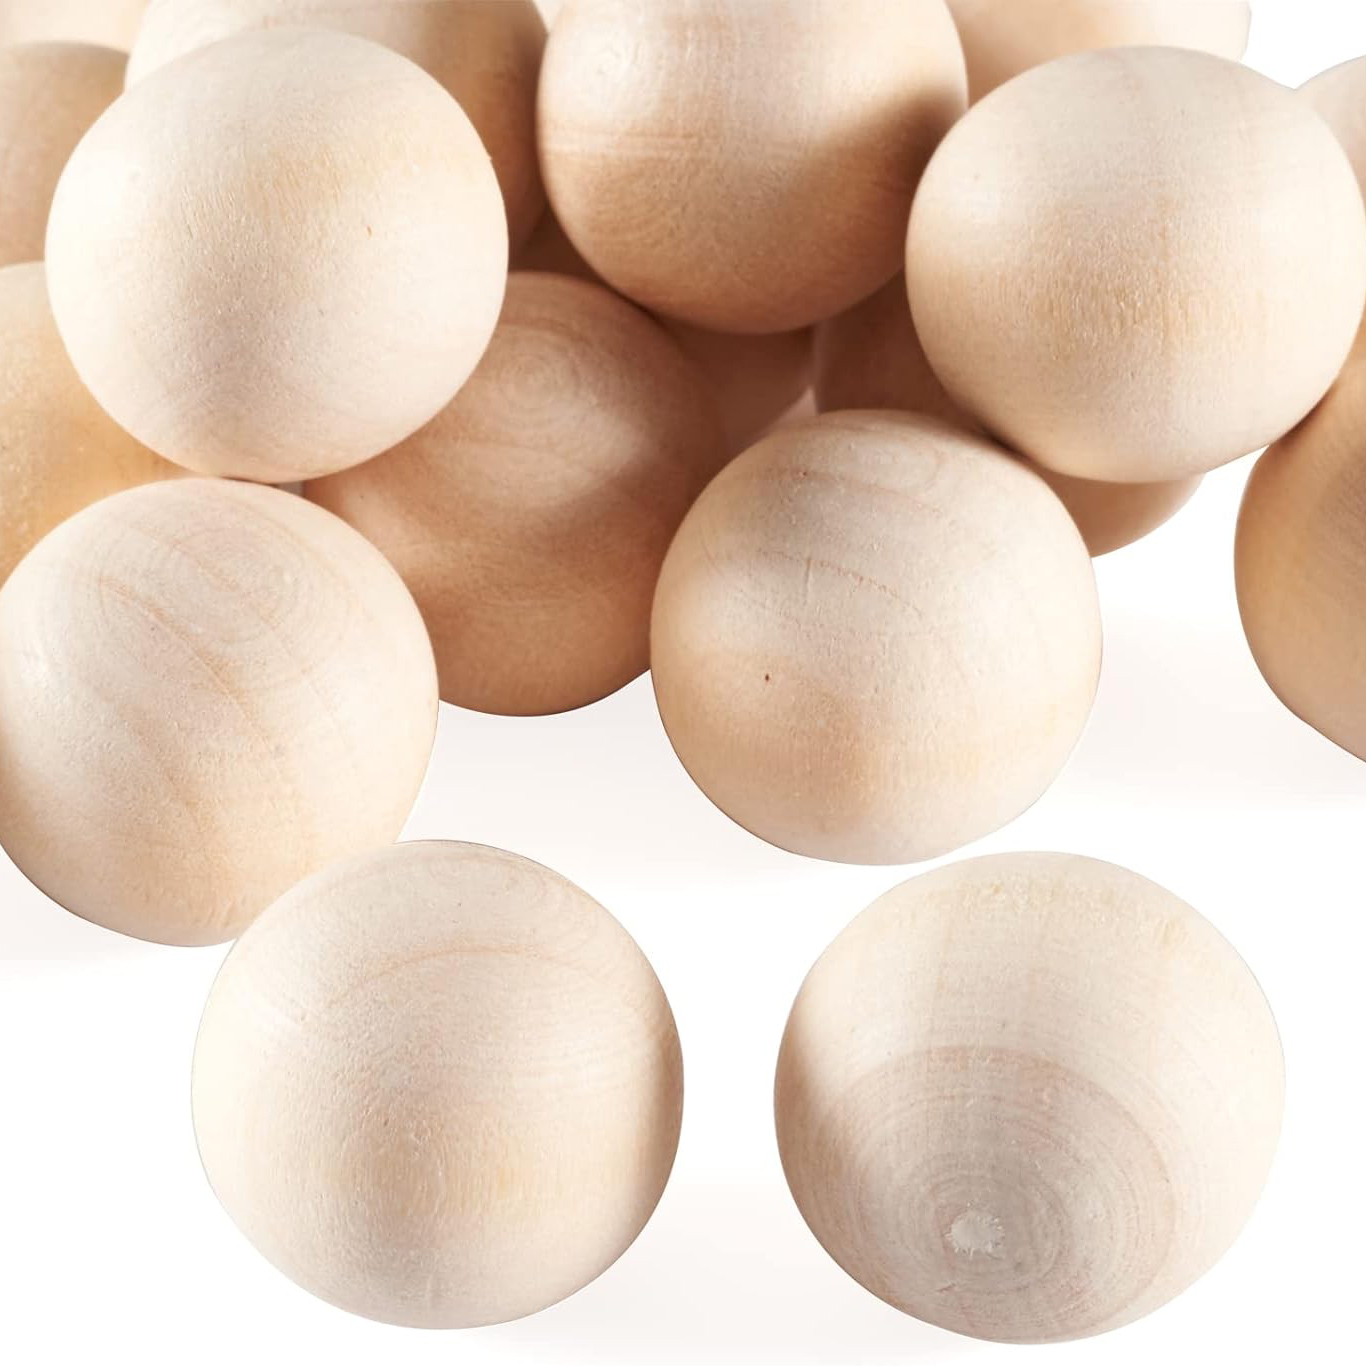 4 inch Round Wooden Balls for Crafts, Bag of 2 Unfinished and Smooth Round  Birch Hardwood Balls, and Wooden Spheres, by Woodpeckers